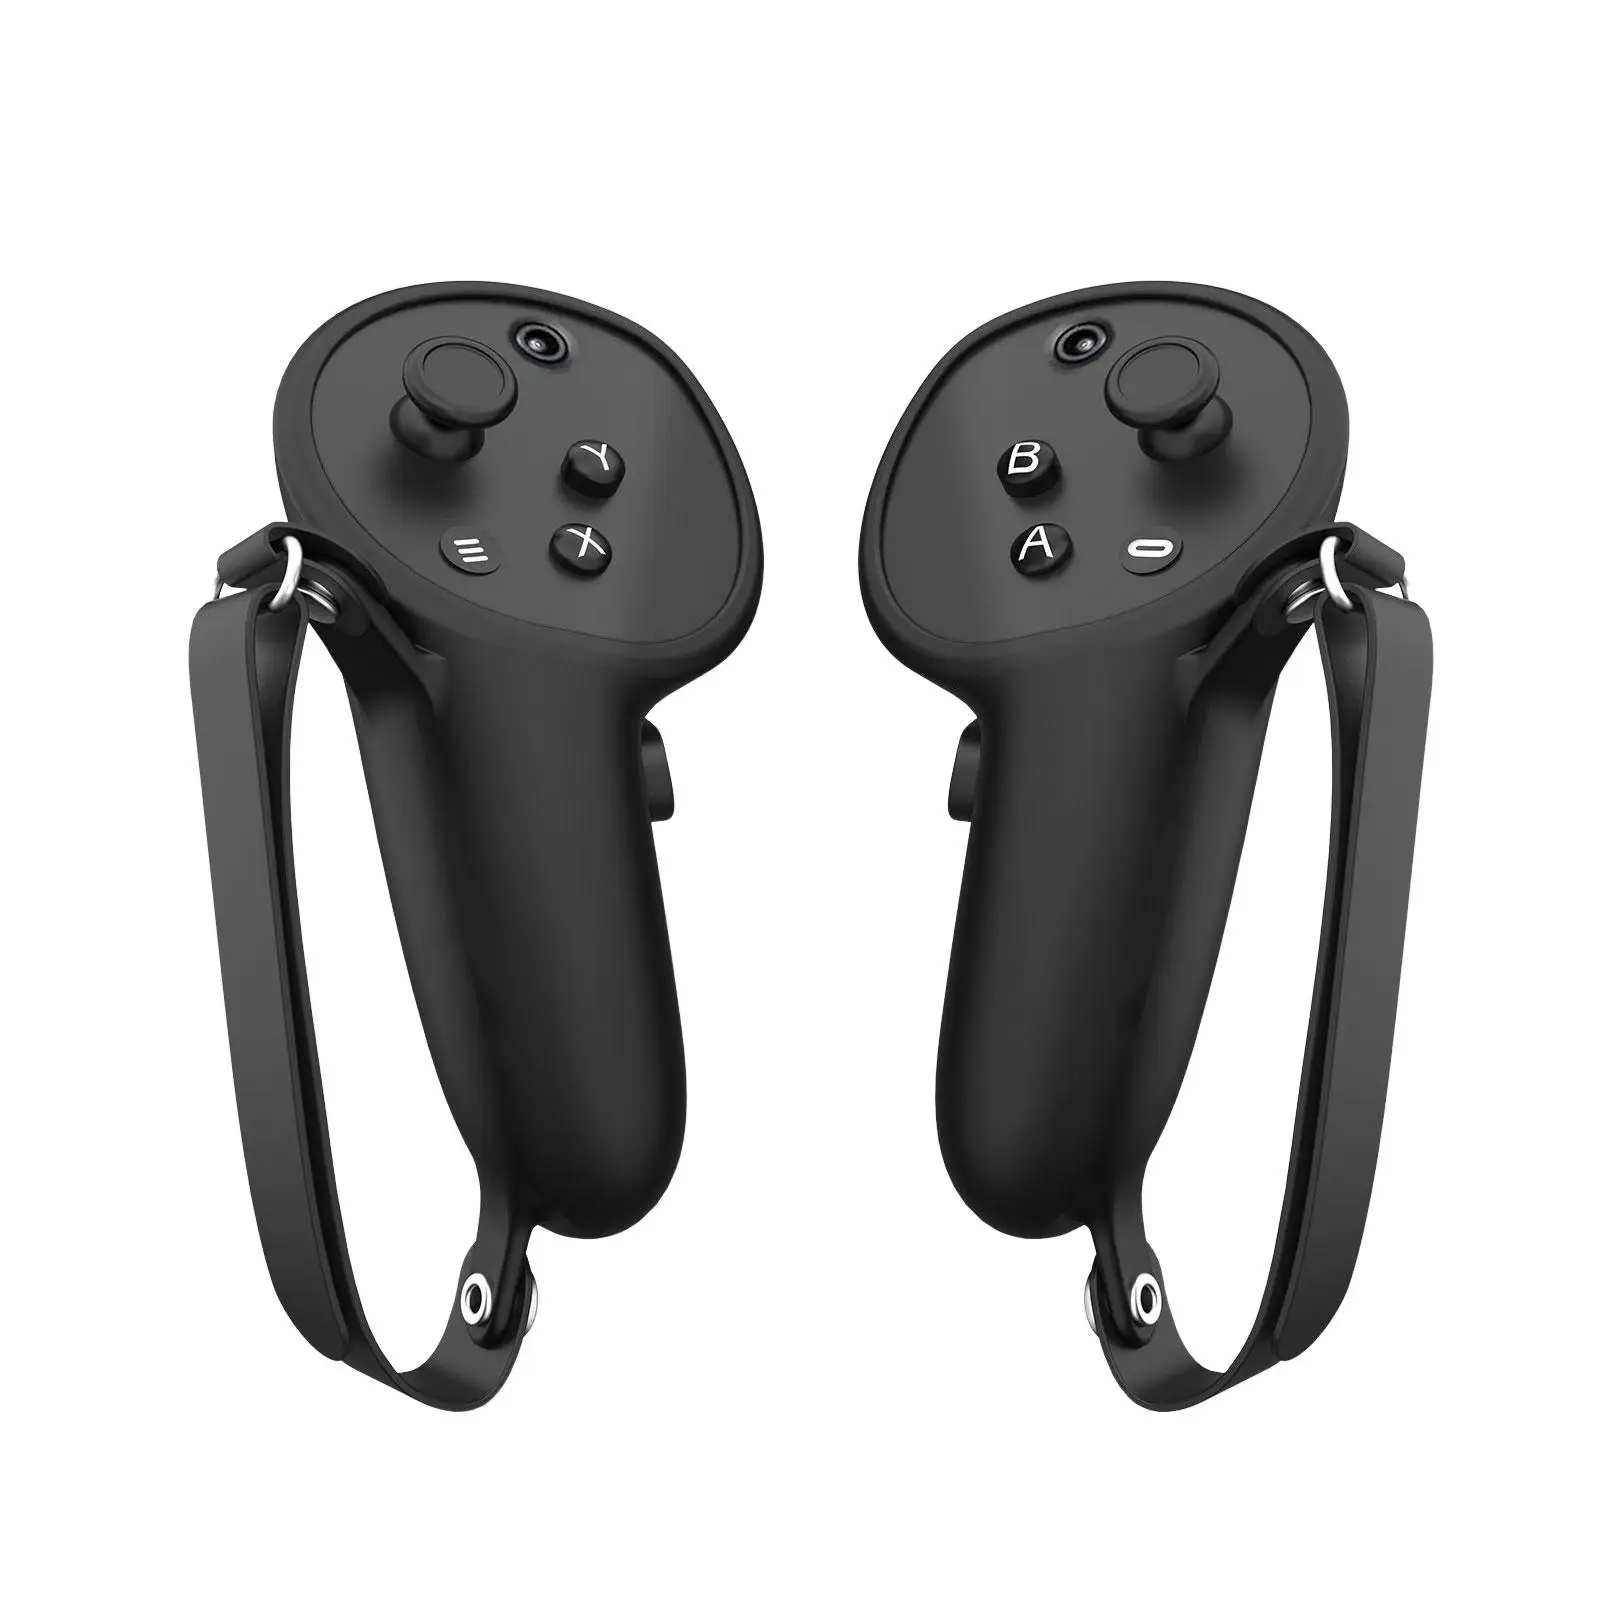 2x Controller Protective Cover Anti Slip Shock Resistance Soft Silicone Handle Protector Case for pro